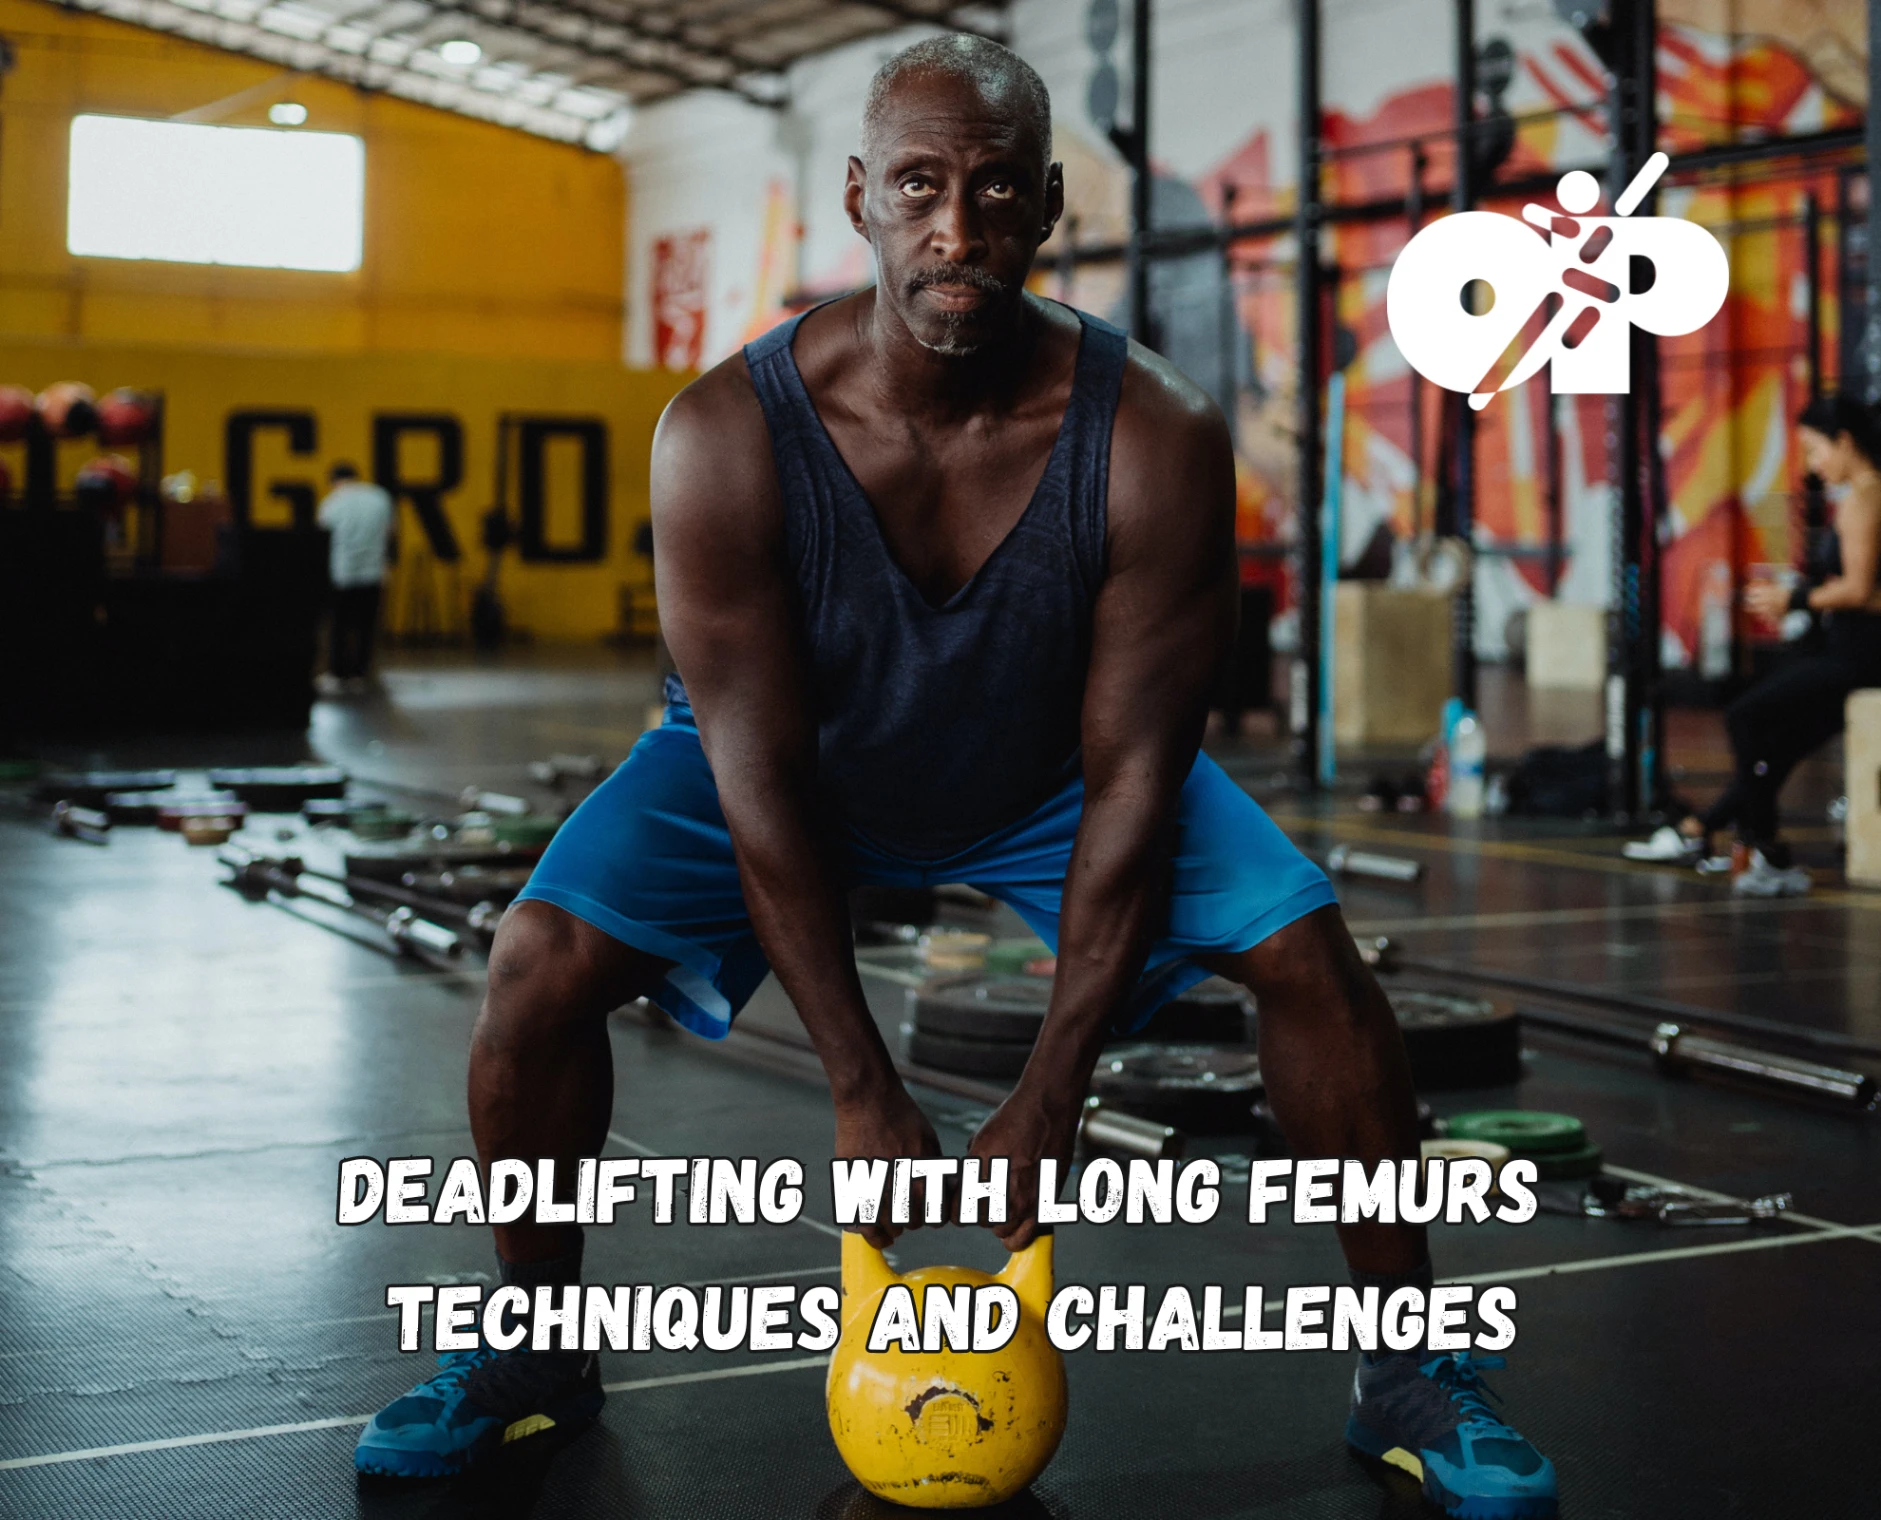 18. Deadlifting with Long Femurs – Techniques and Challenges